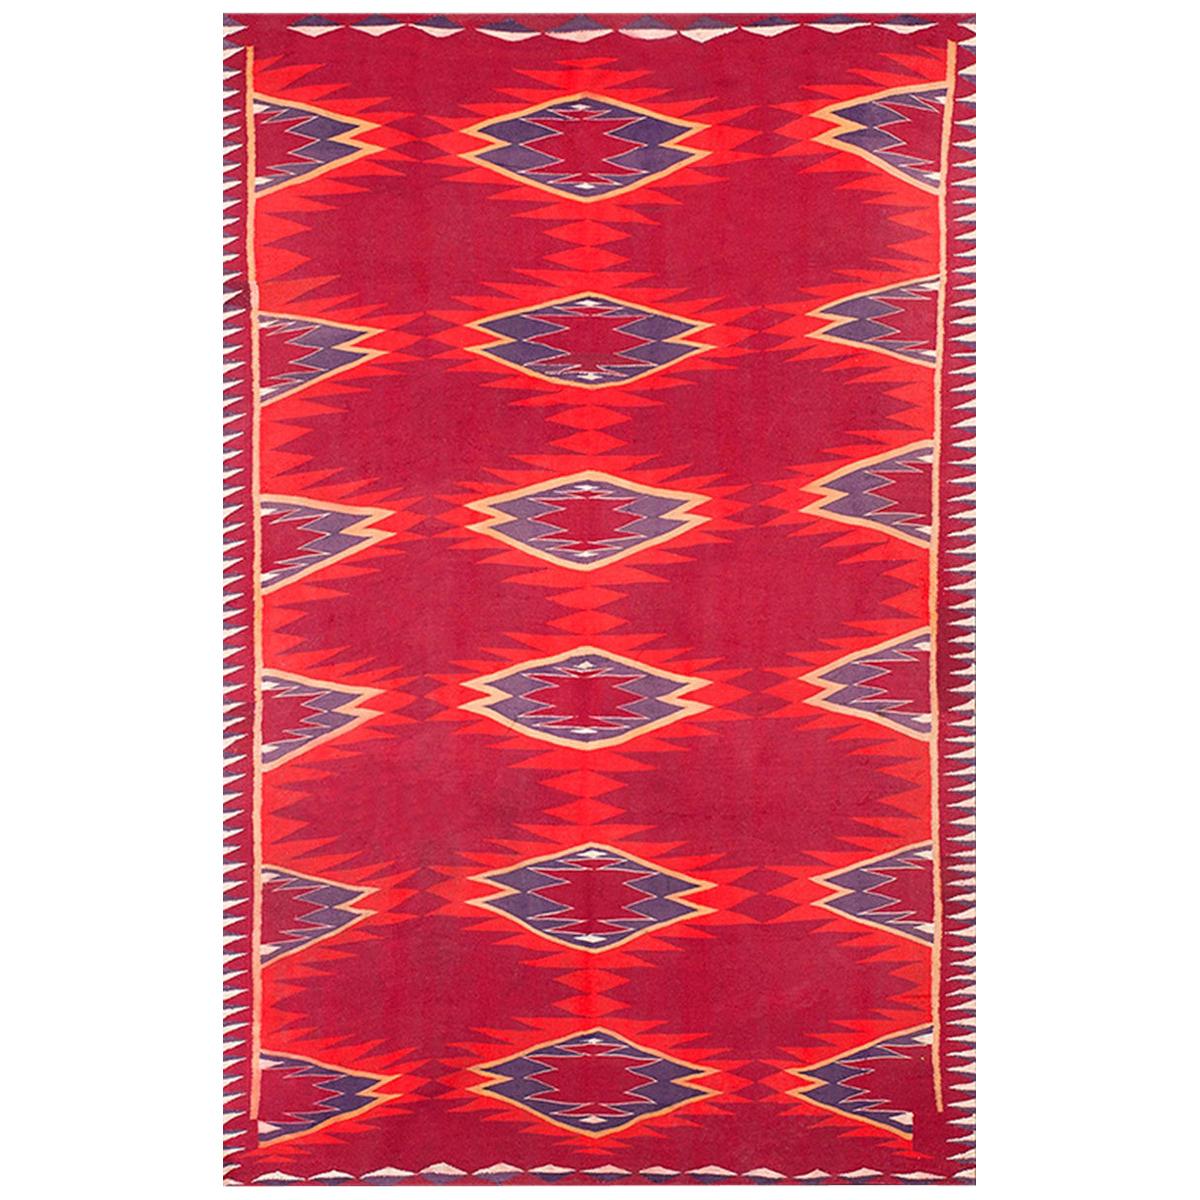 Late 19th Century American Navajo Germantown Carpet ( 4' x 6' - 122 x 183 ) For Sale